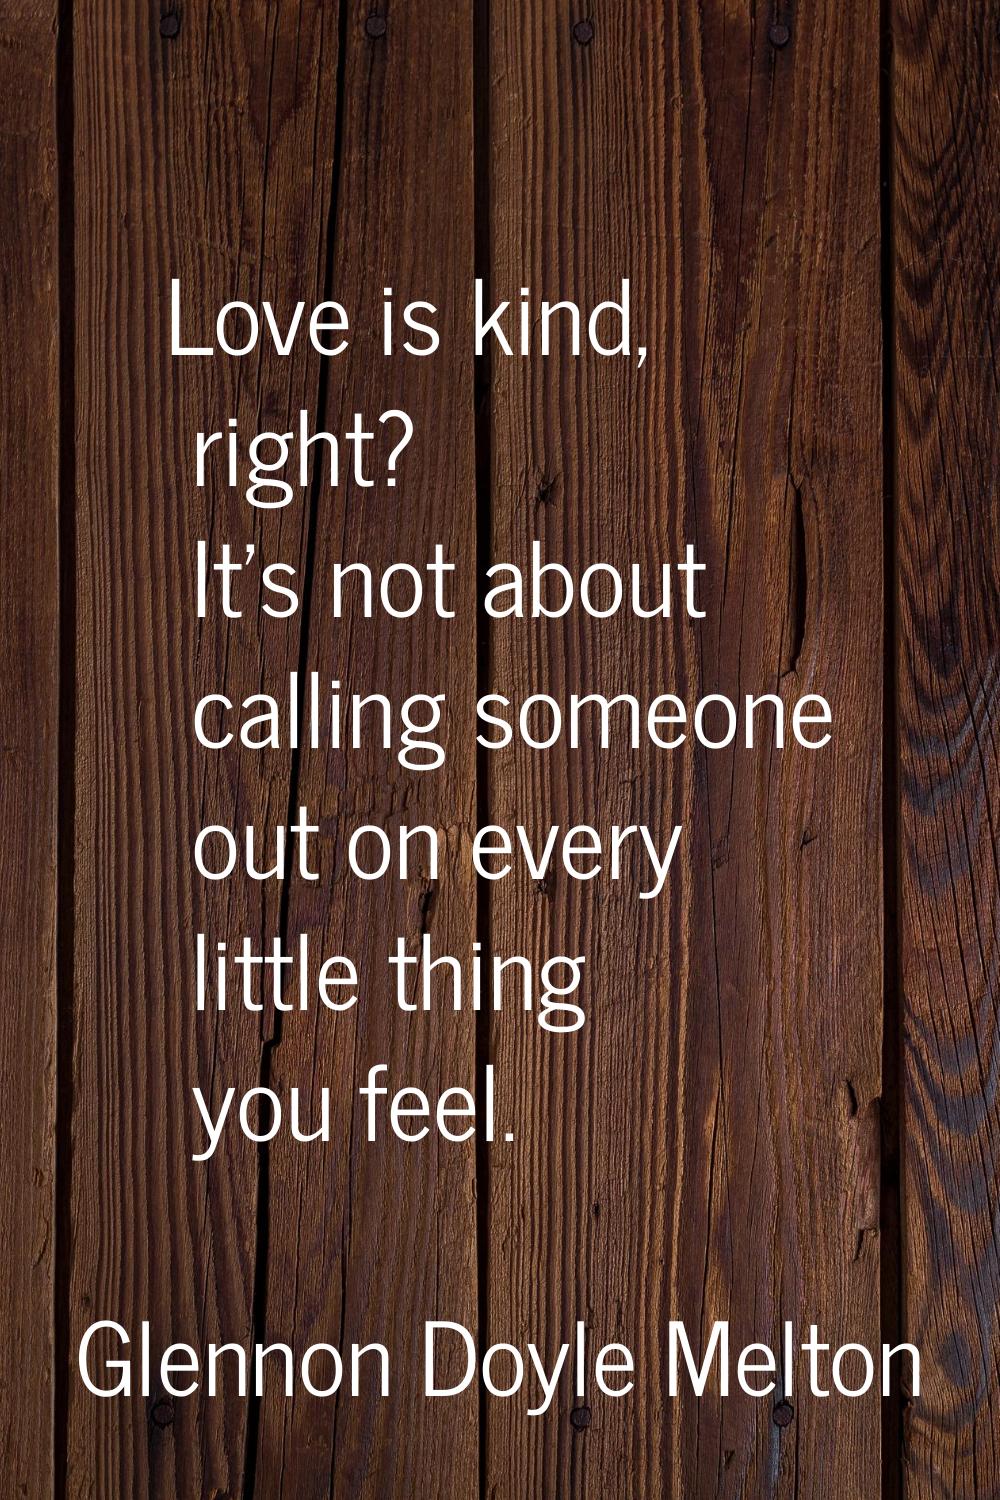 Love is kind, right? It's not about calling someone out on every little thing you feel.